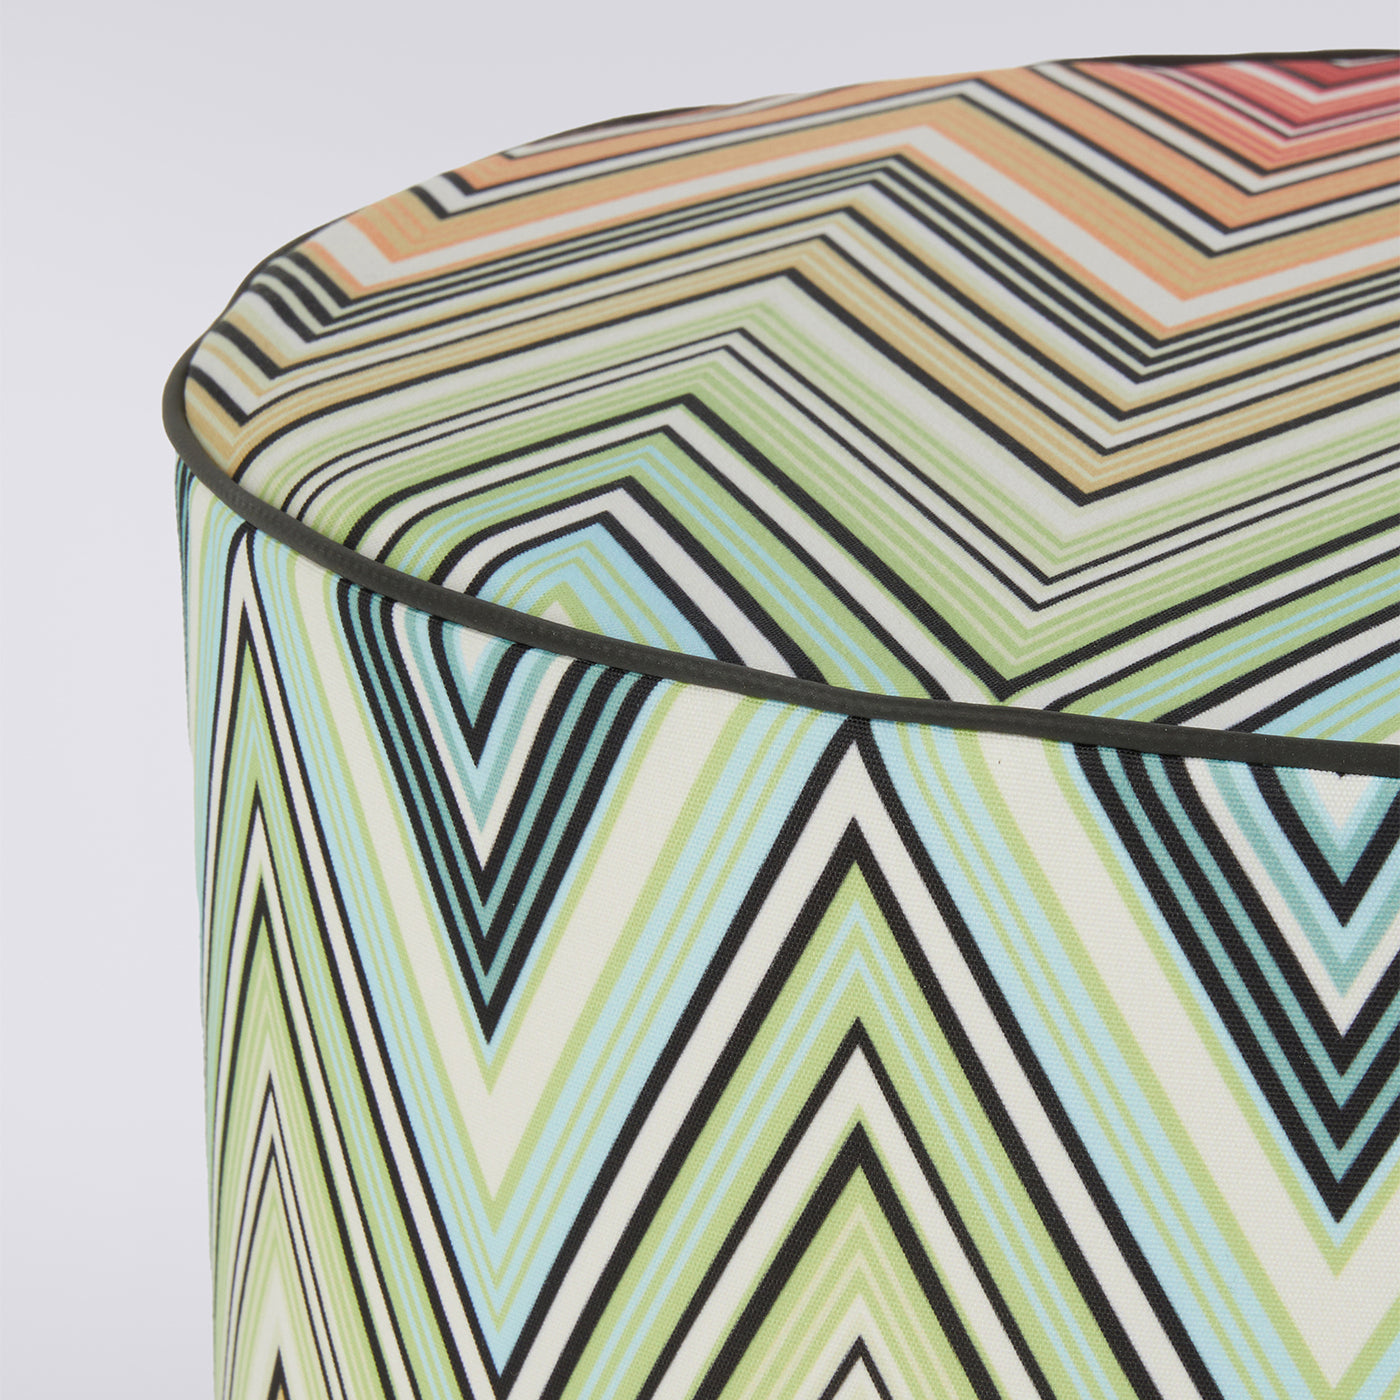 Kew Cylindrical Zigzag Pattern Outdoor Pouf #4 - Alternative view 2